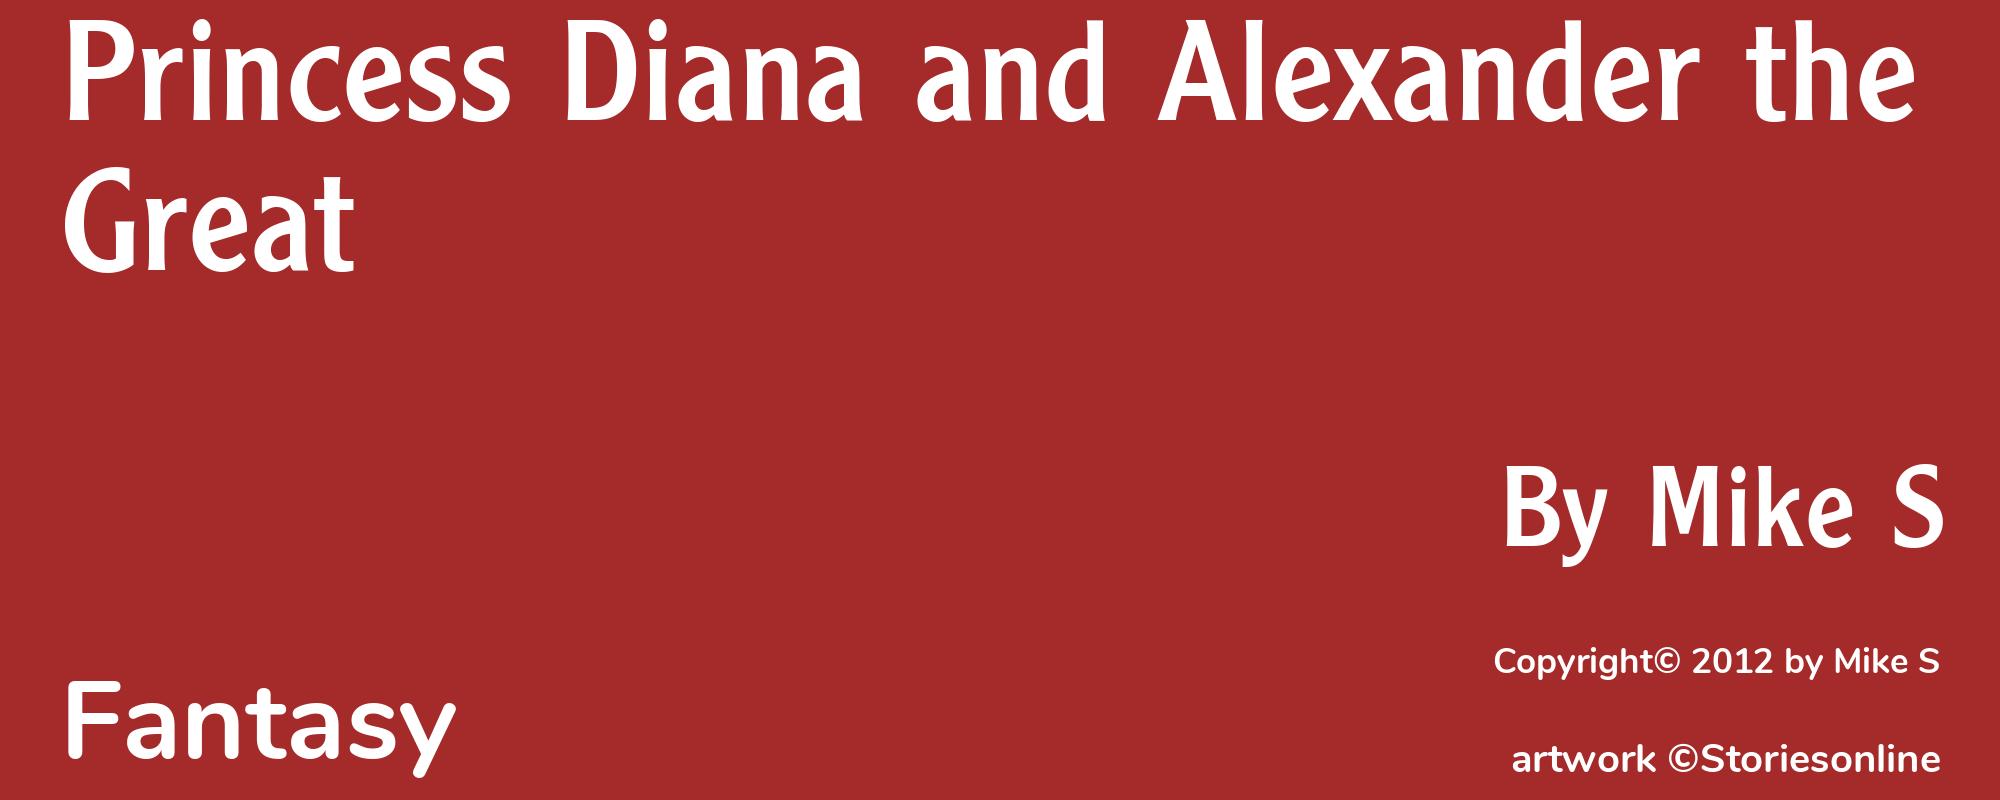 Princess Diana and Alexander the Great - Cover